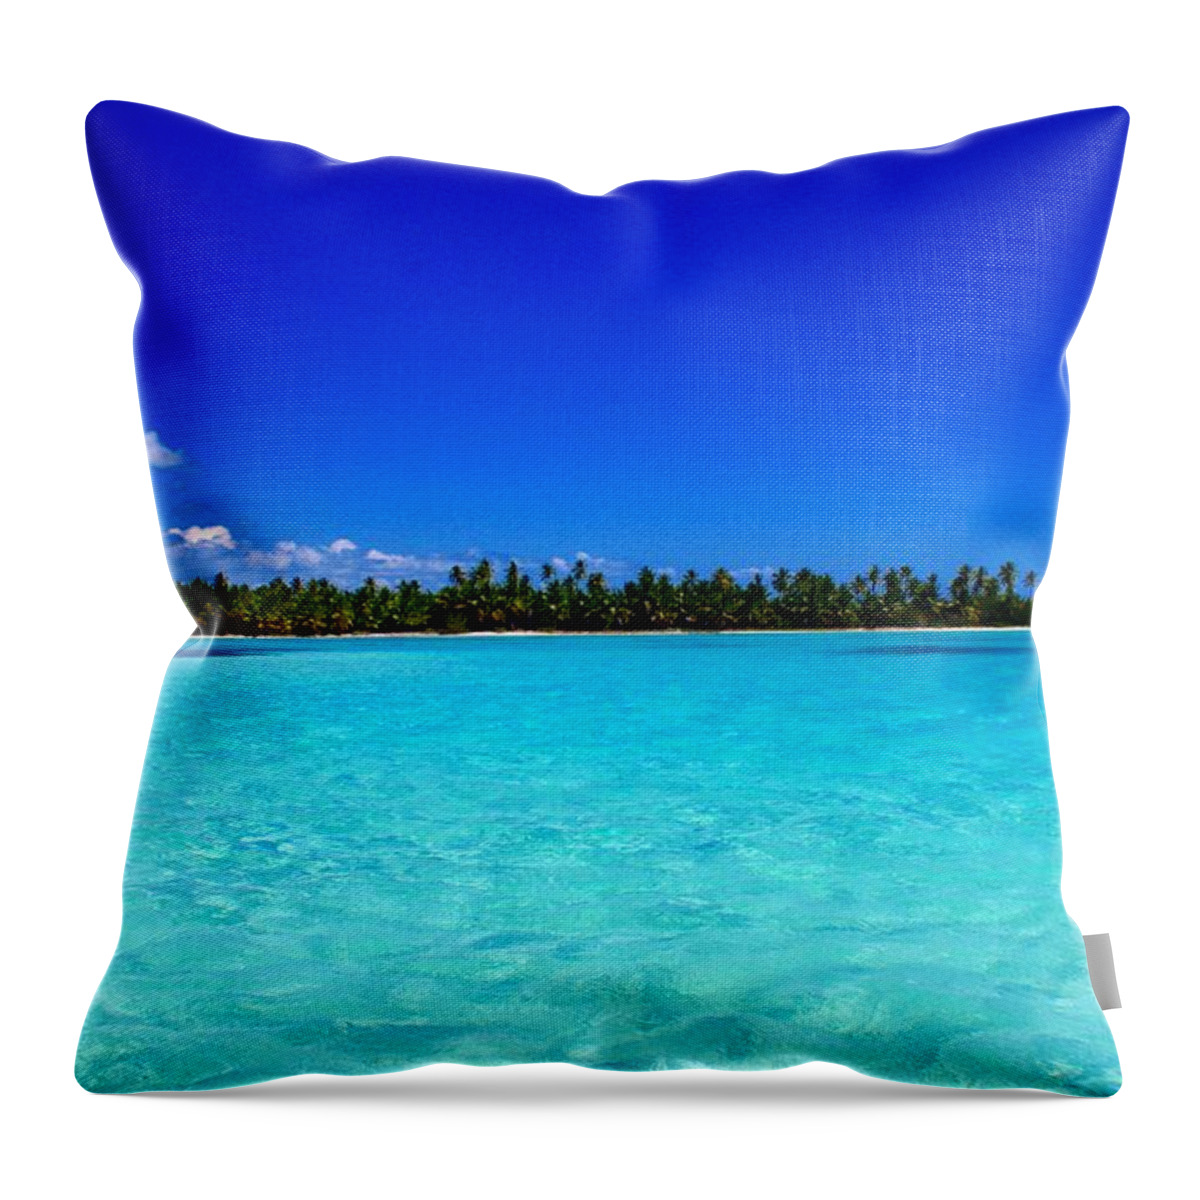 Scenics Throw Pillow featuring the photograph Caribbean Sea by Abner L. Teixeira